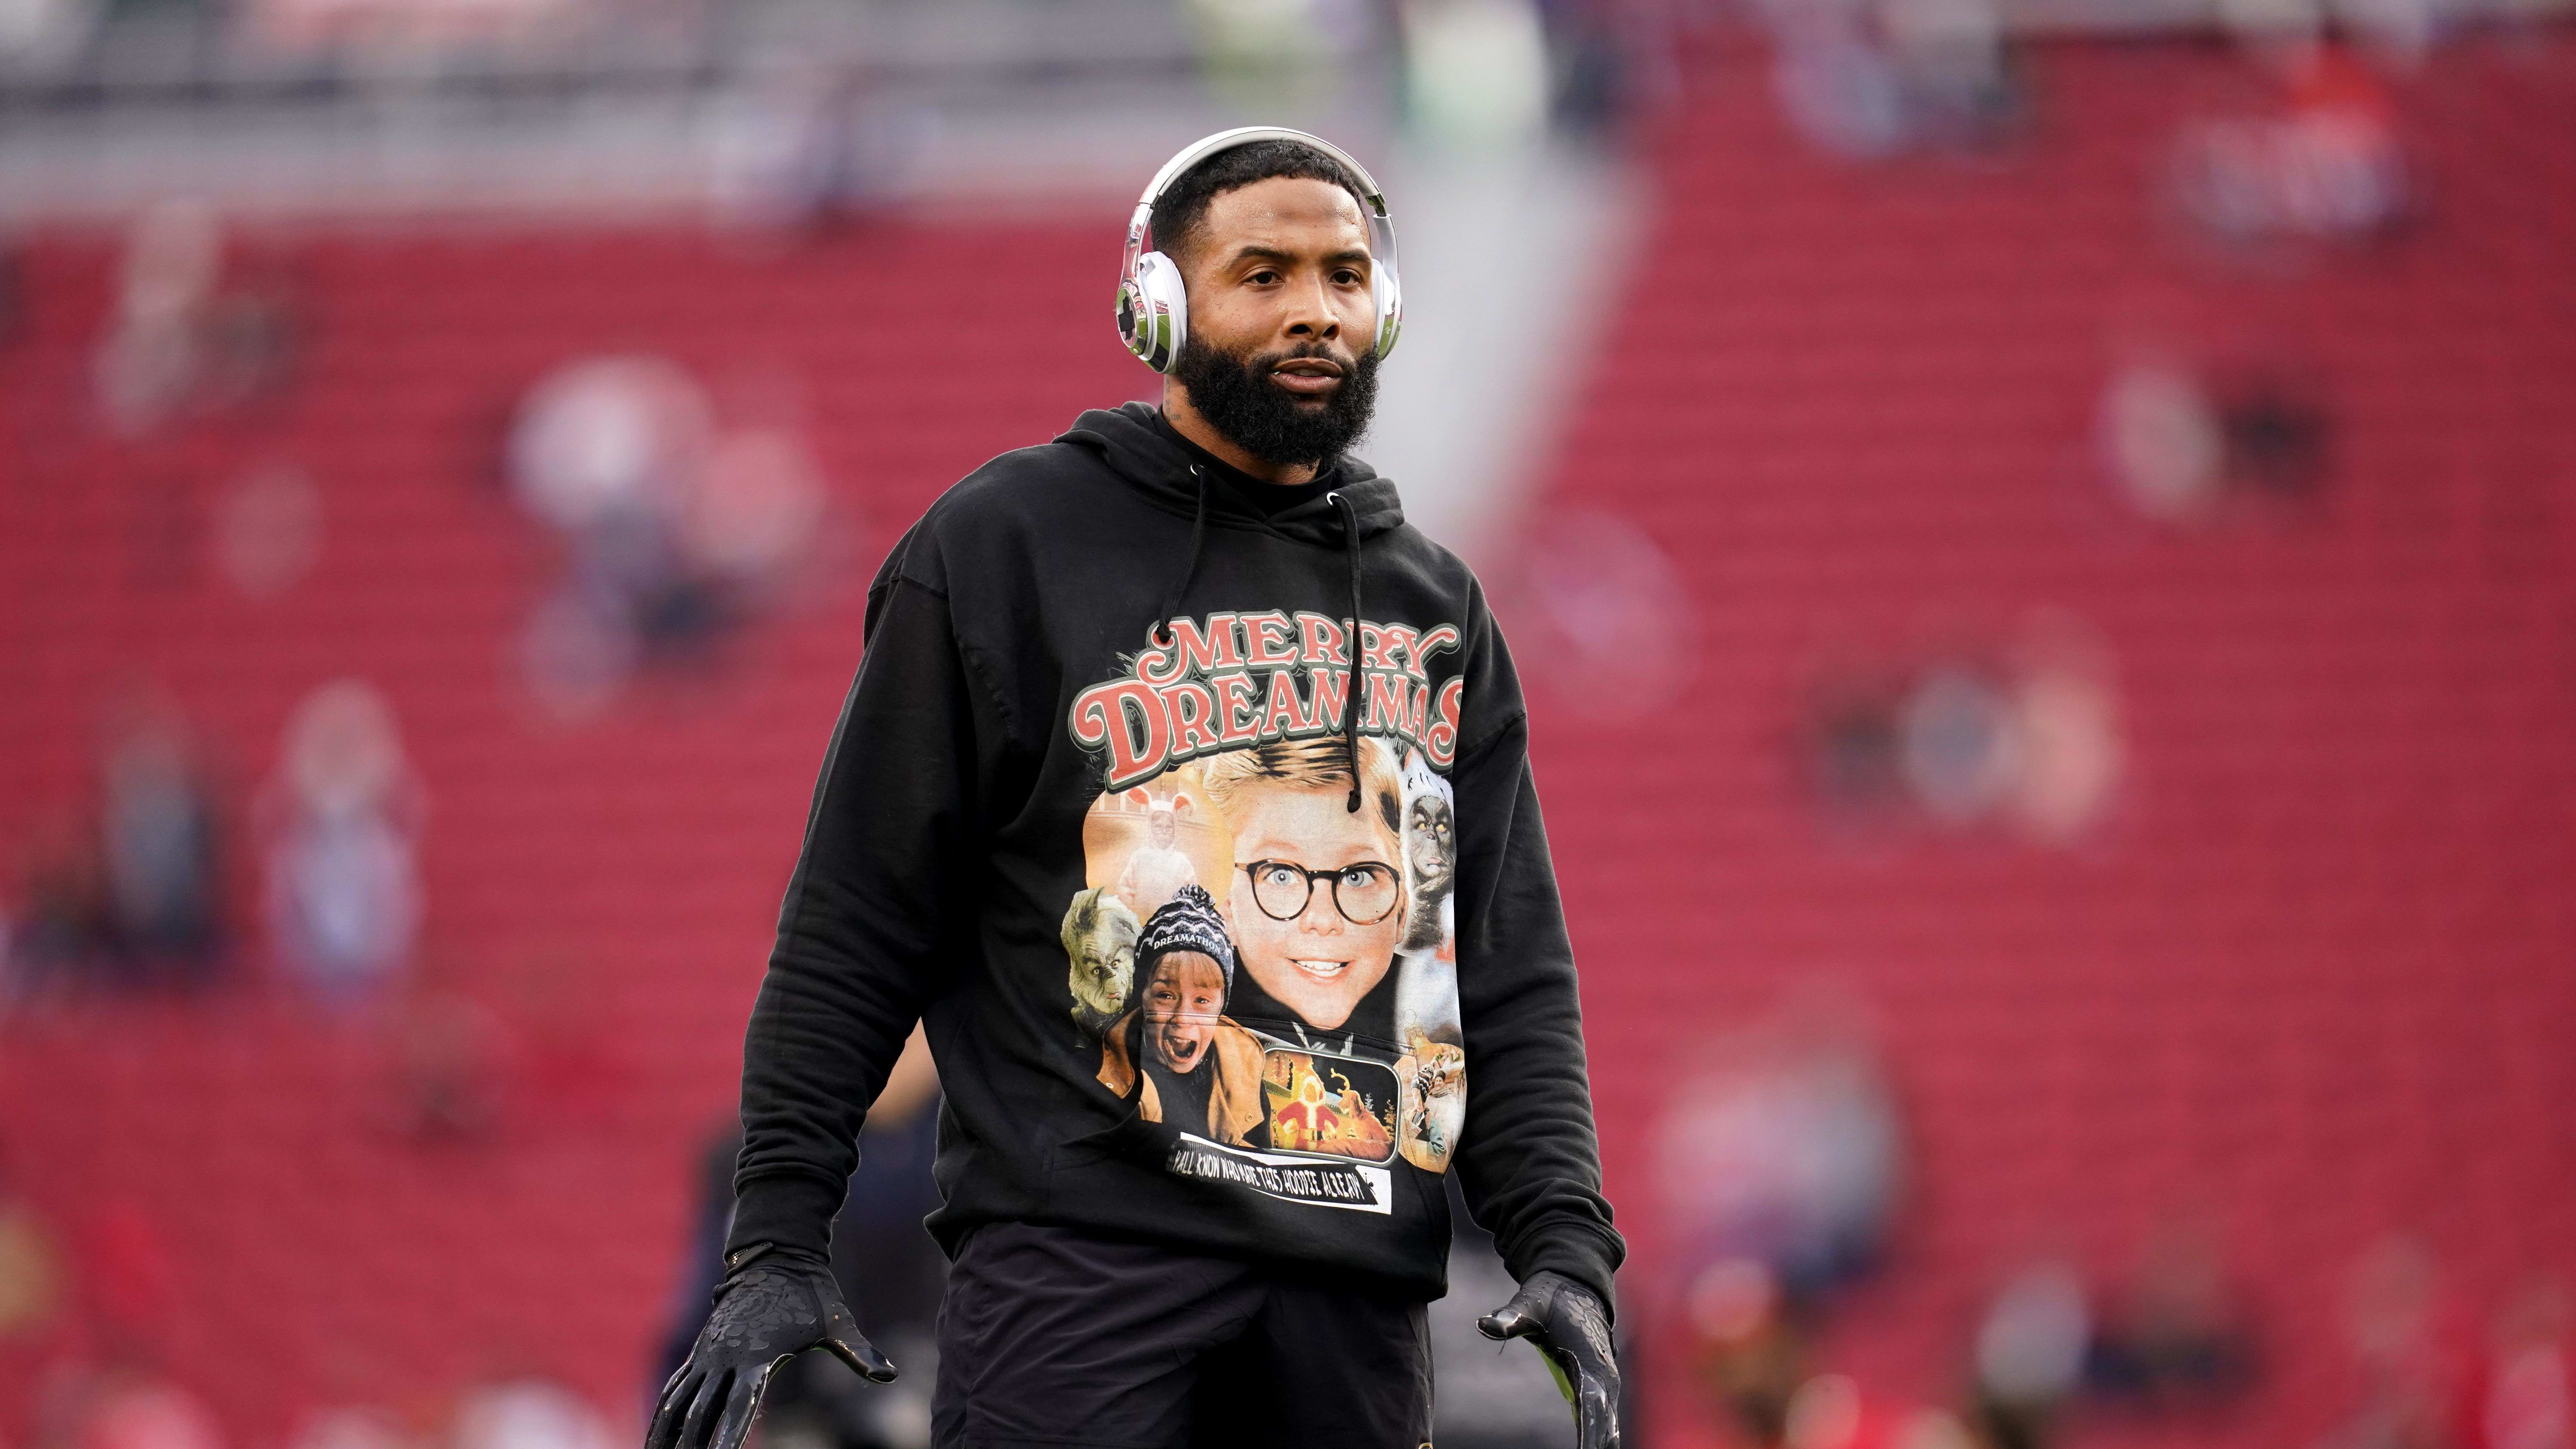 Odell Beckham Jr. Signing With Miami Dolphins, per Report